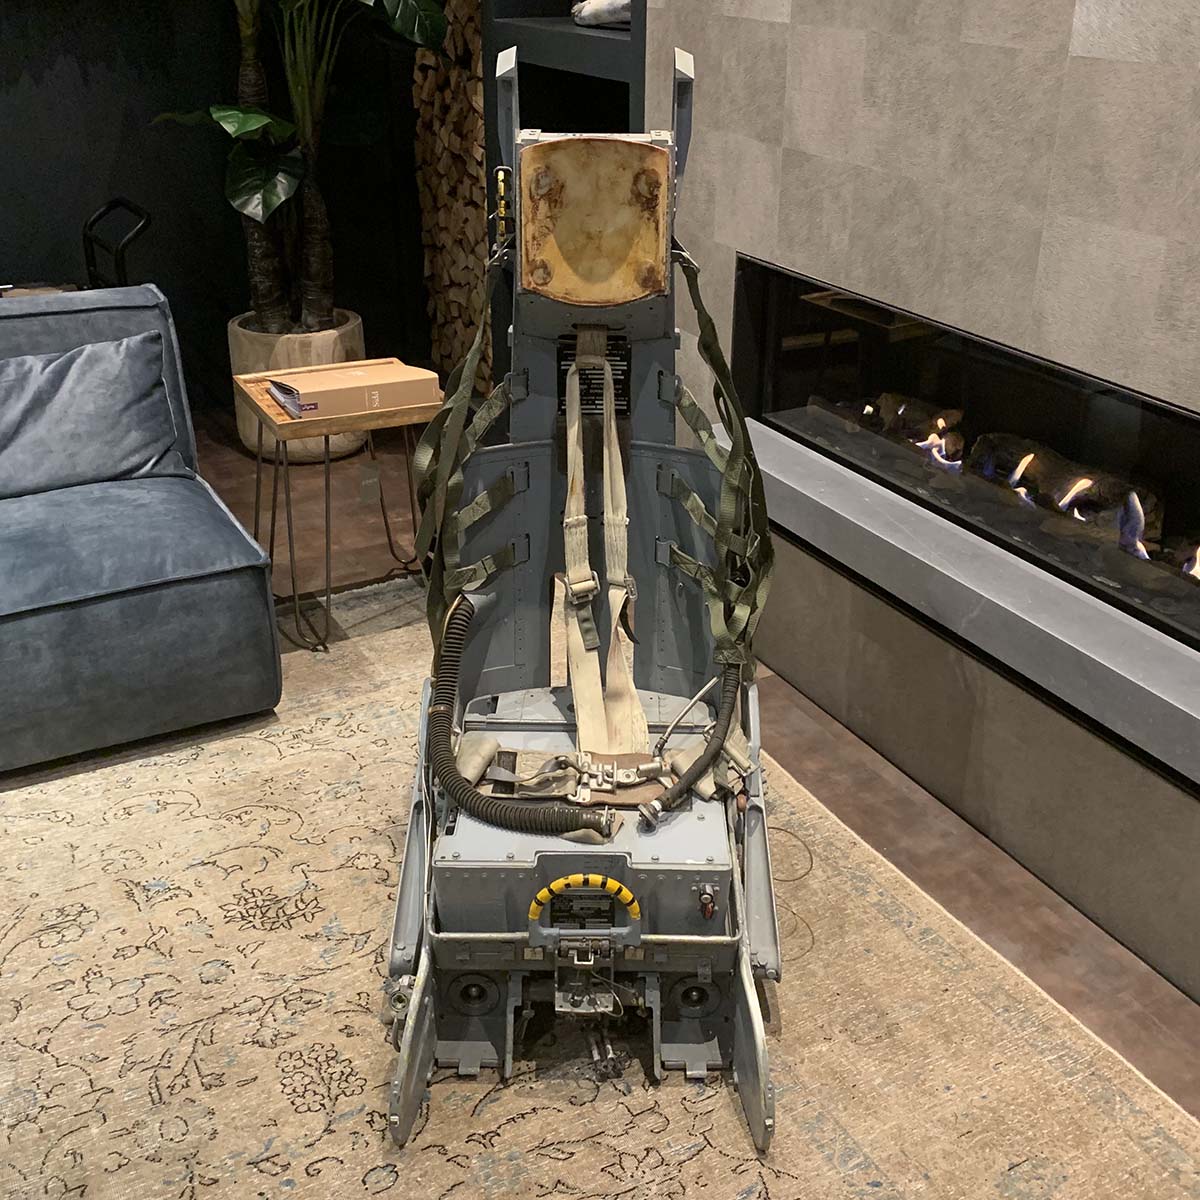 Lockheed Ejection seat in front of fireplace.